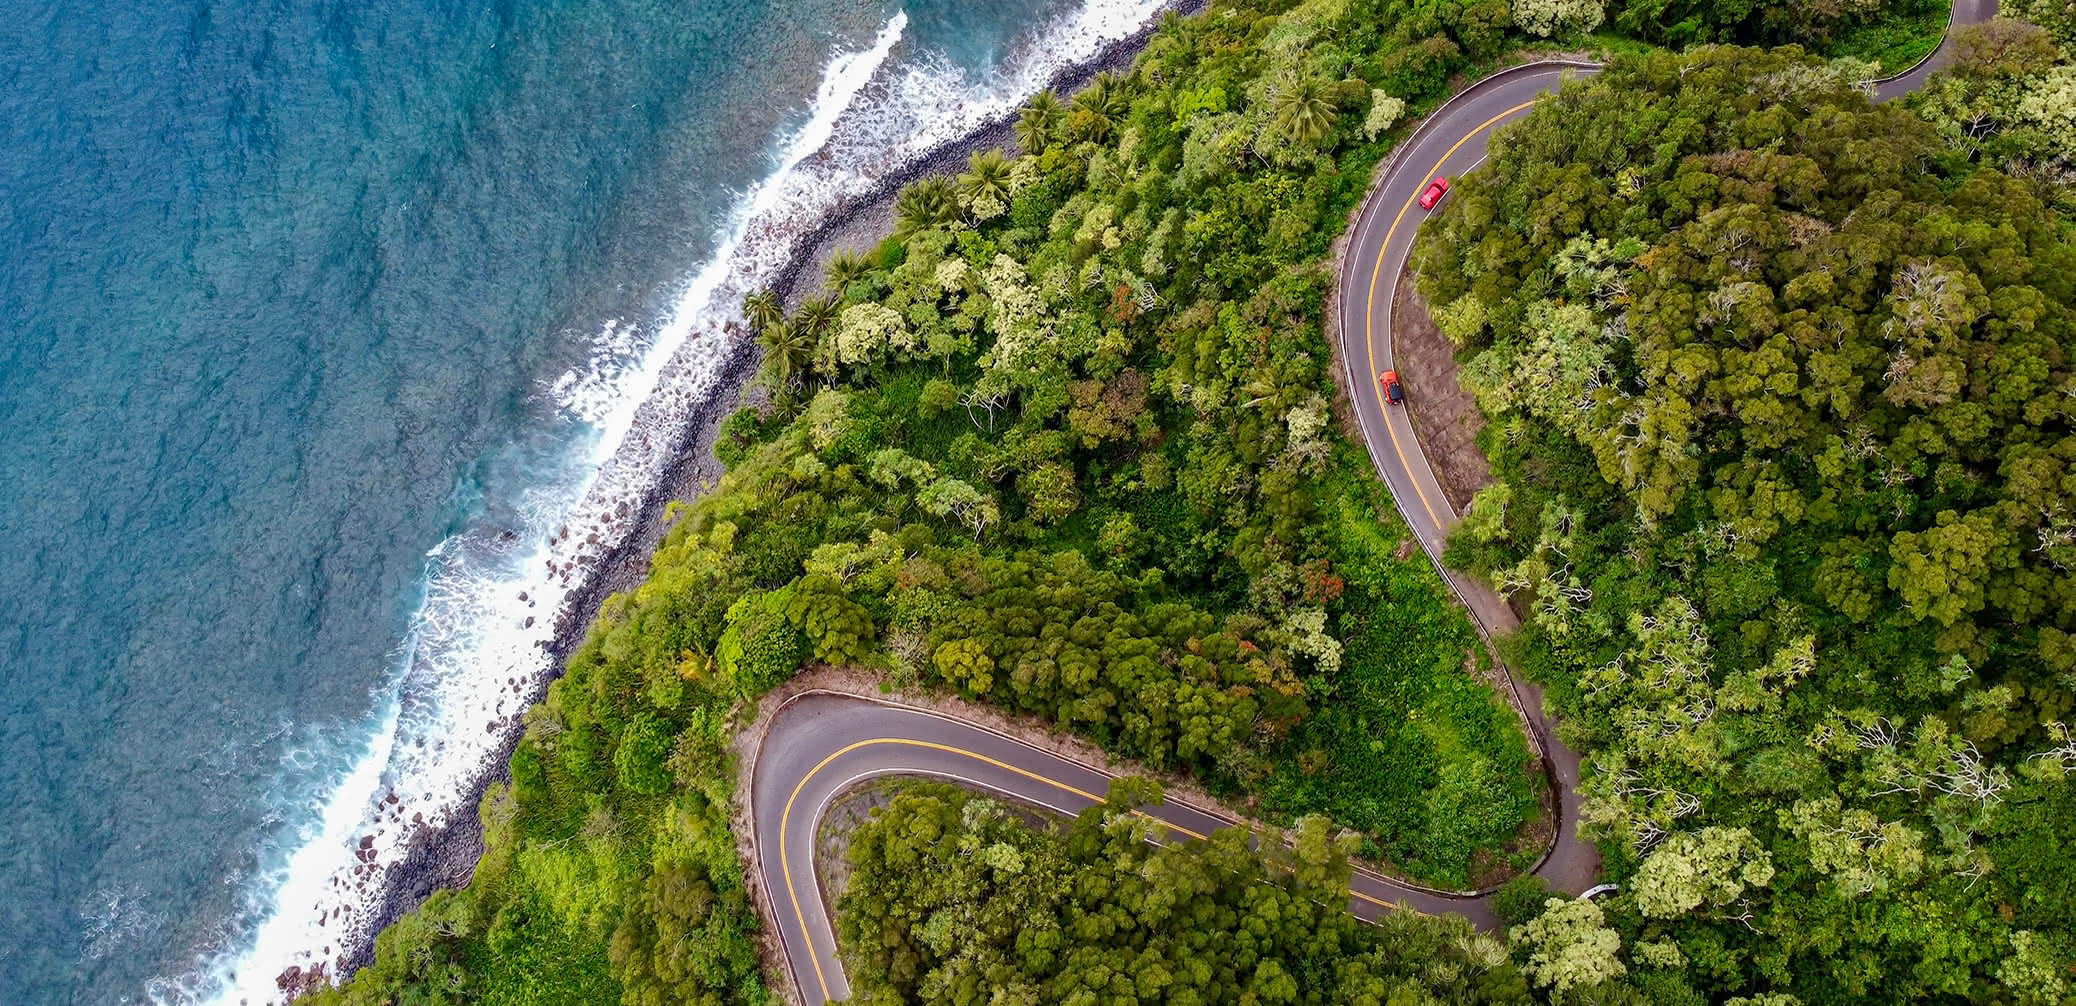 10 Best Stops Along The Road To Hana with Kids